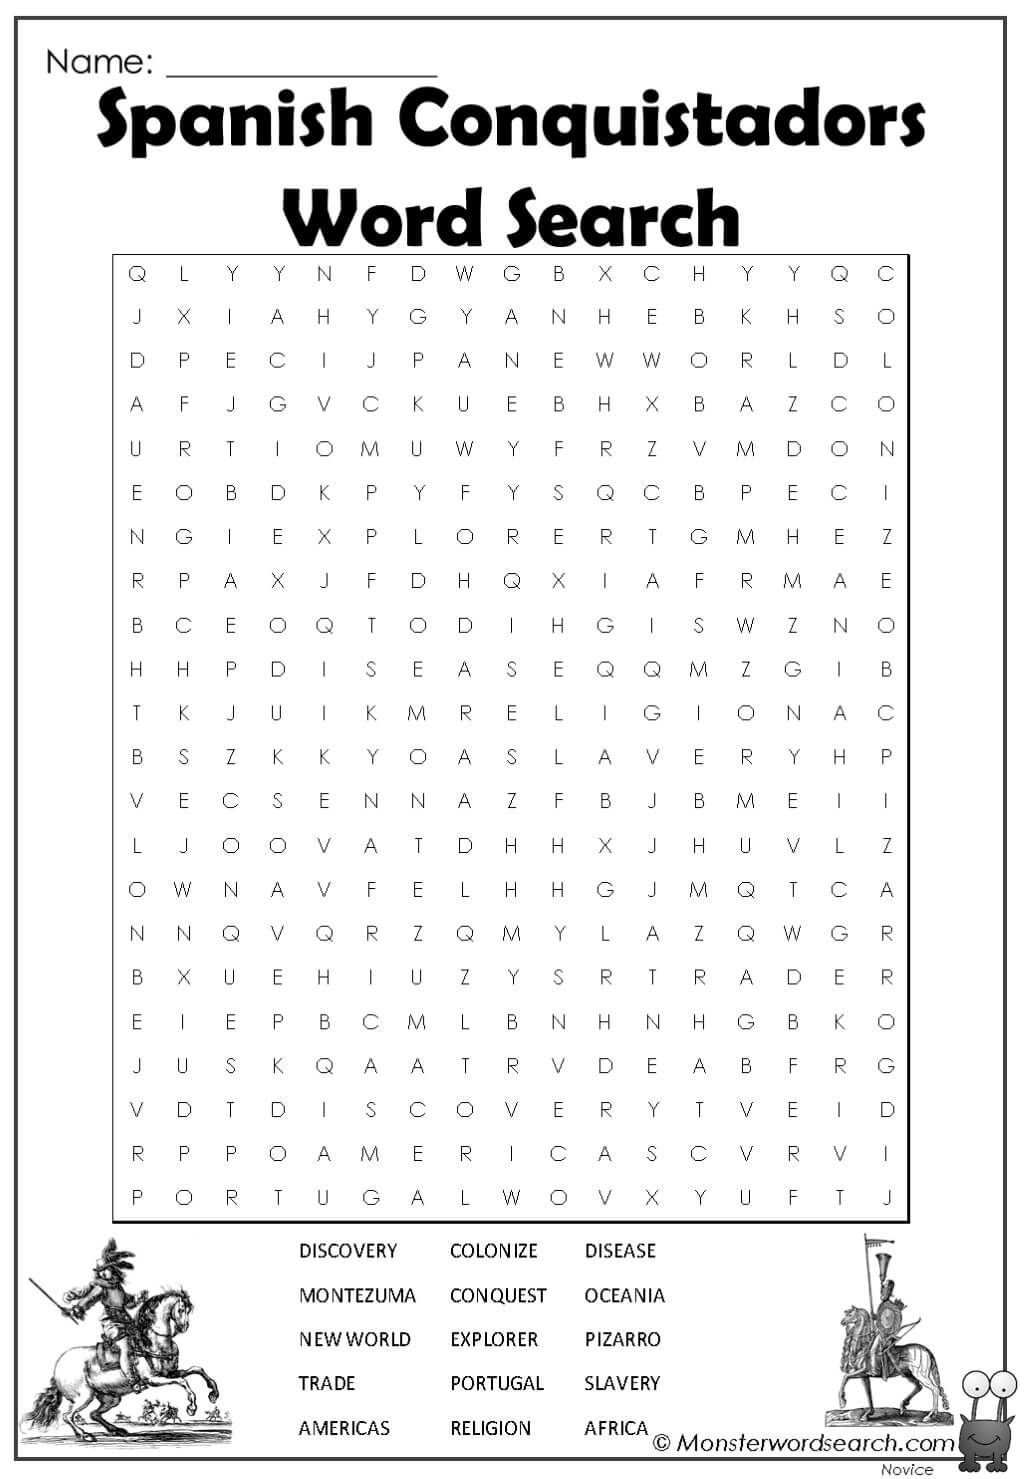 Spanish Conquistadors Word Search Monster Word Search